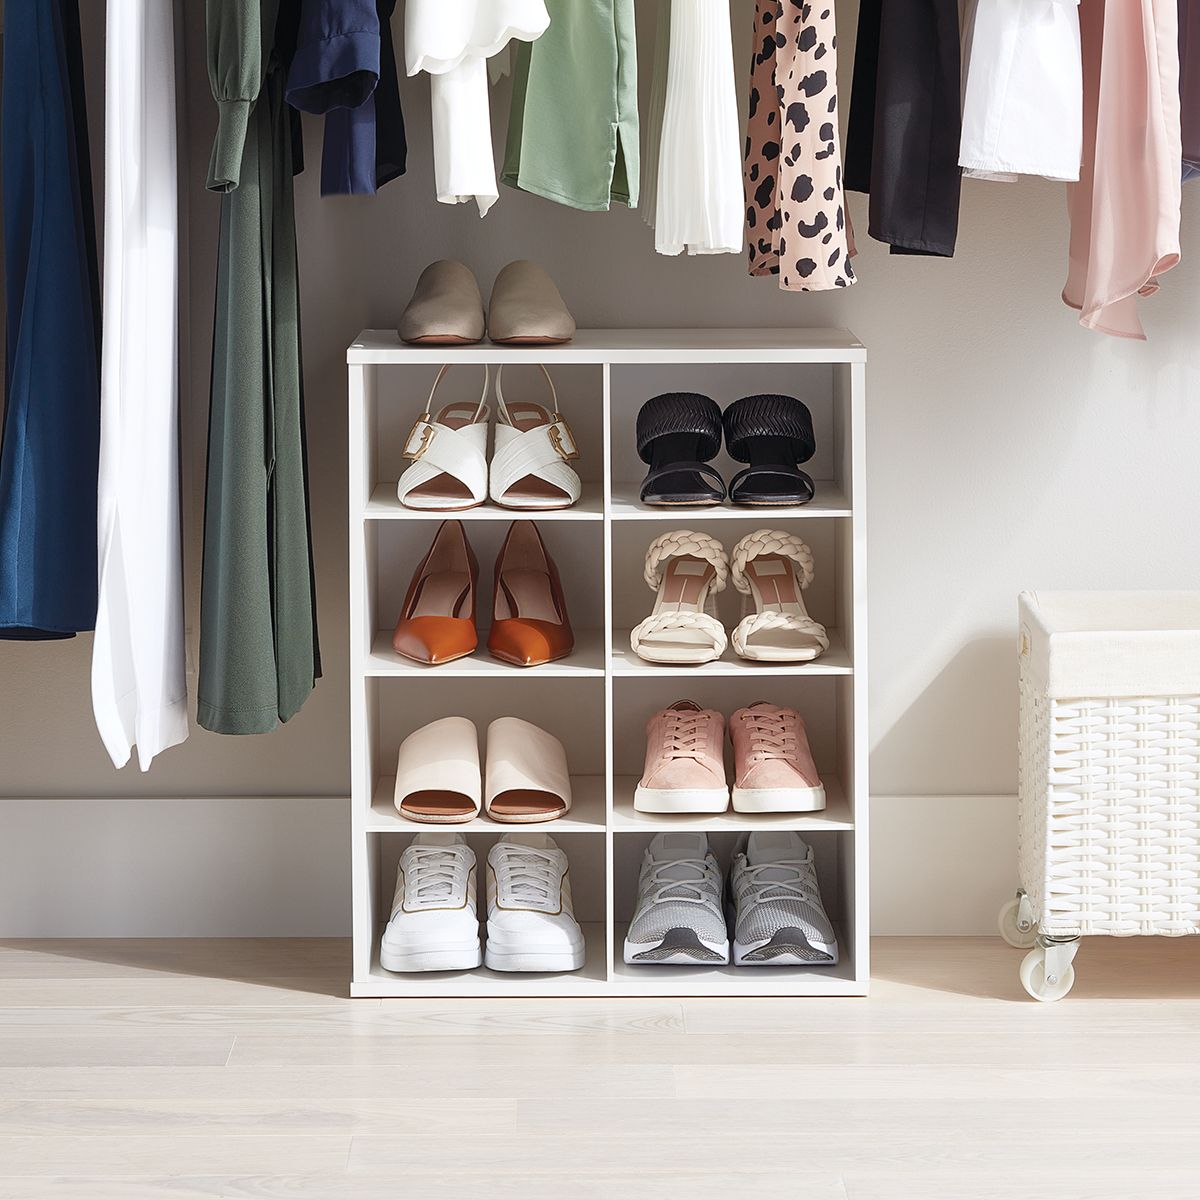 The Container Store 8 Pair Shoe Organizer | The Container Store Inside Wardrobes Shoe Storages (Gallery 2 of 20)